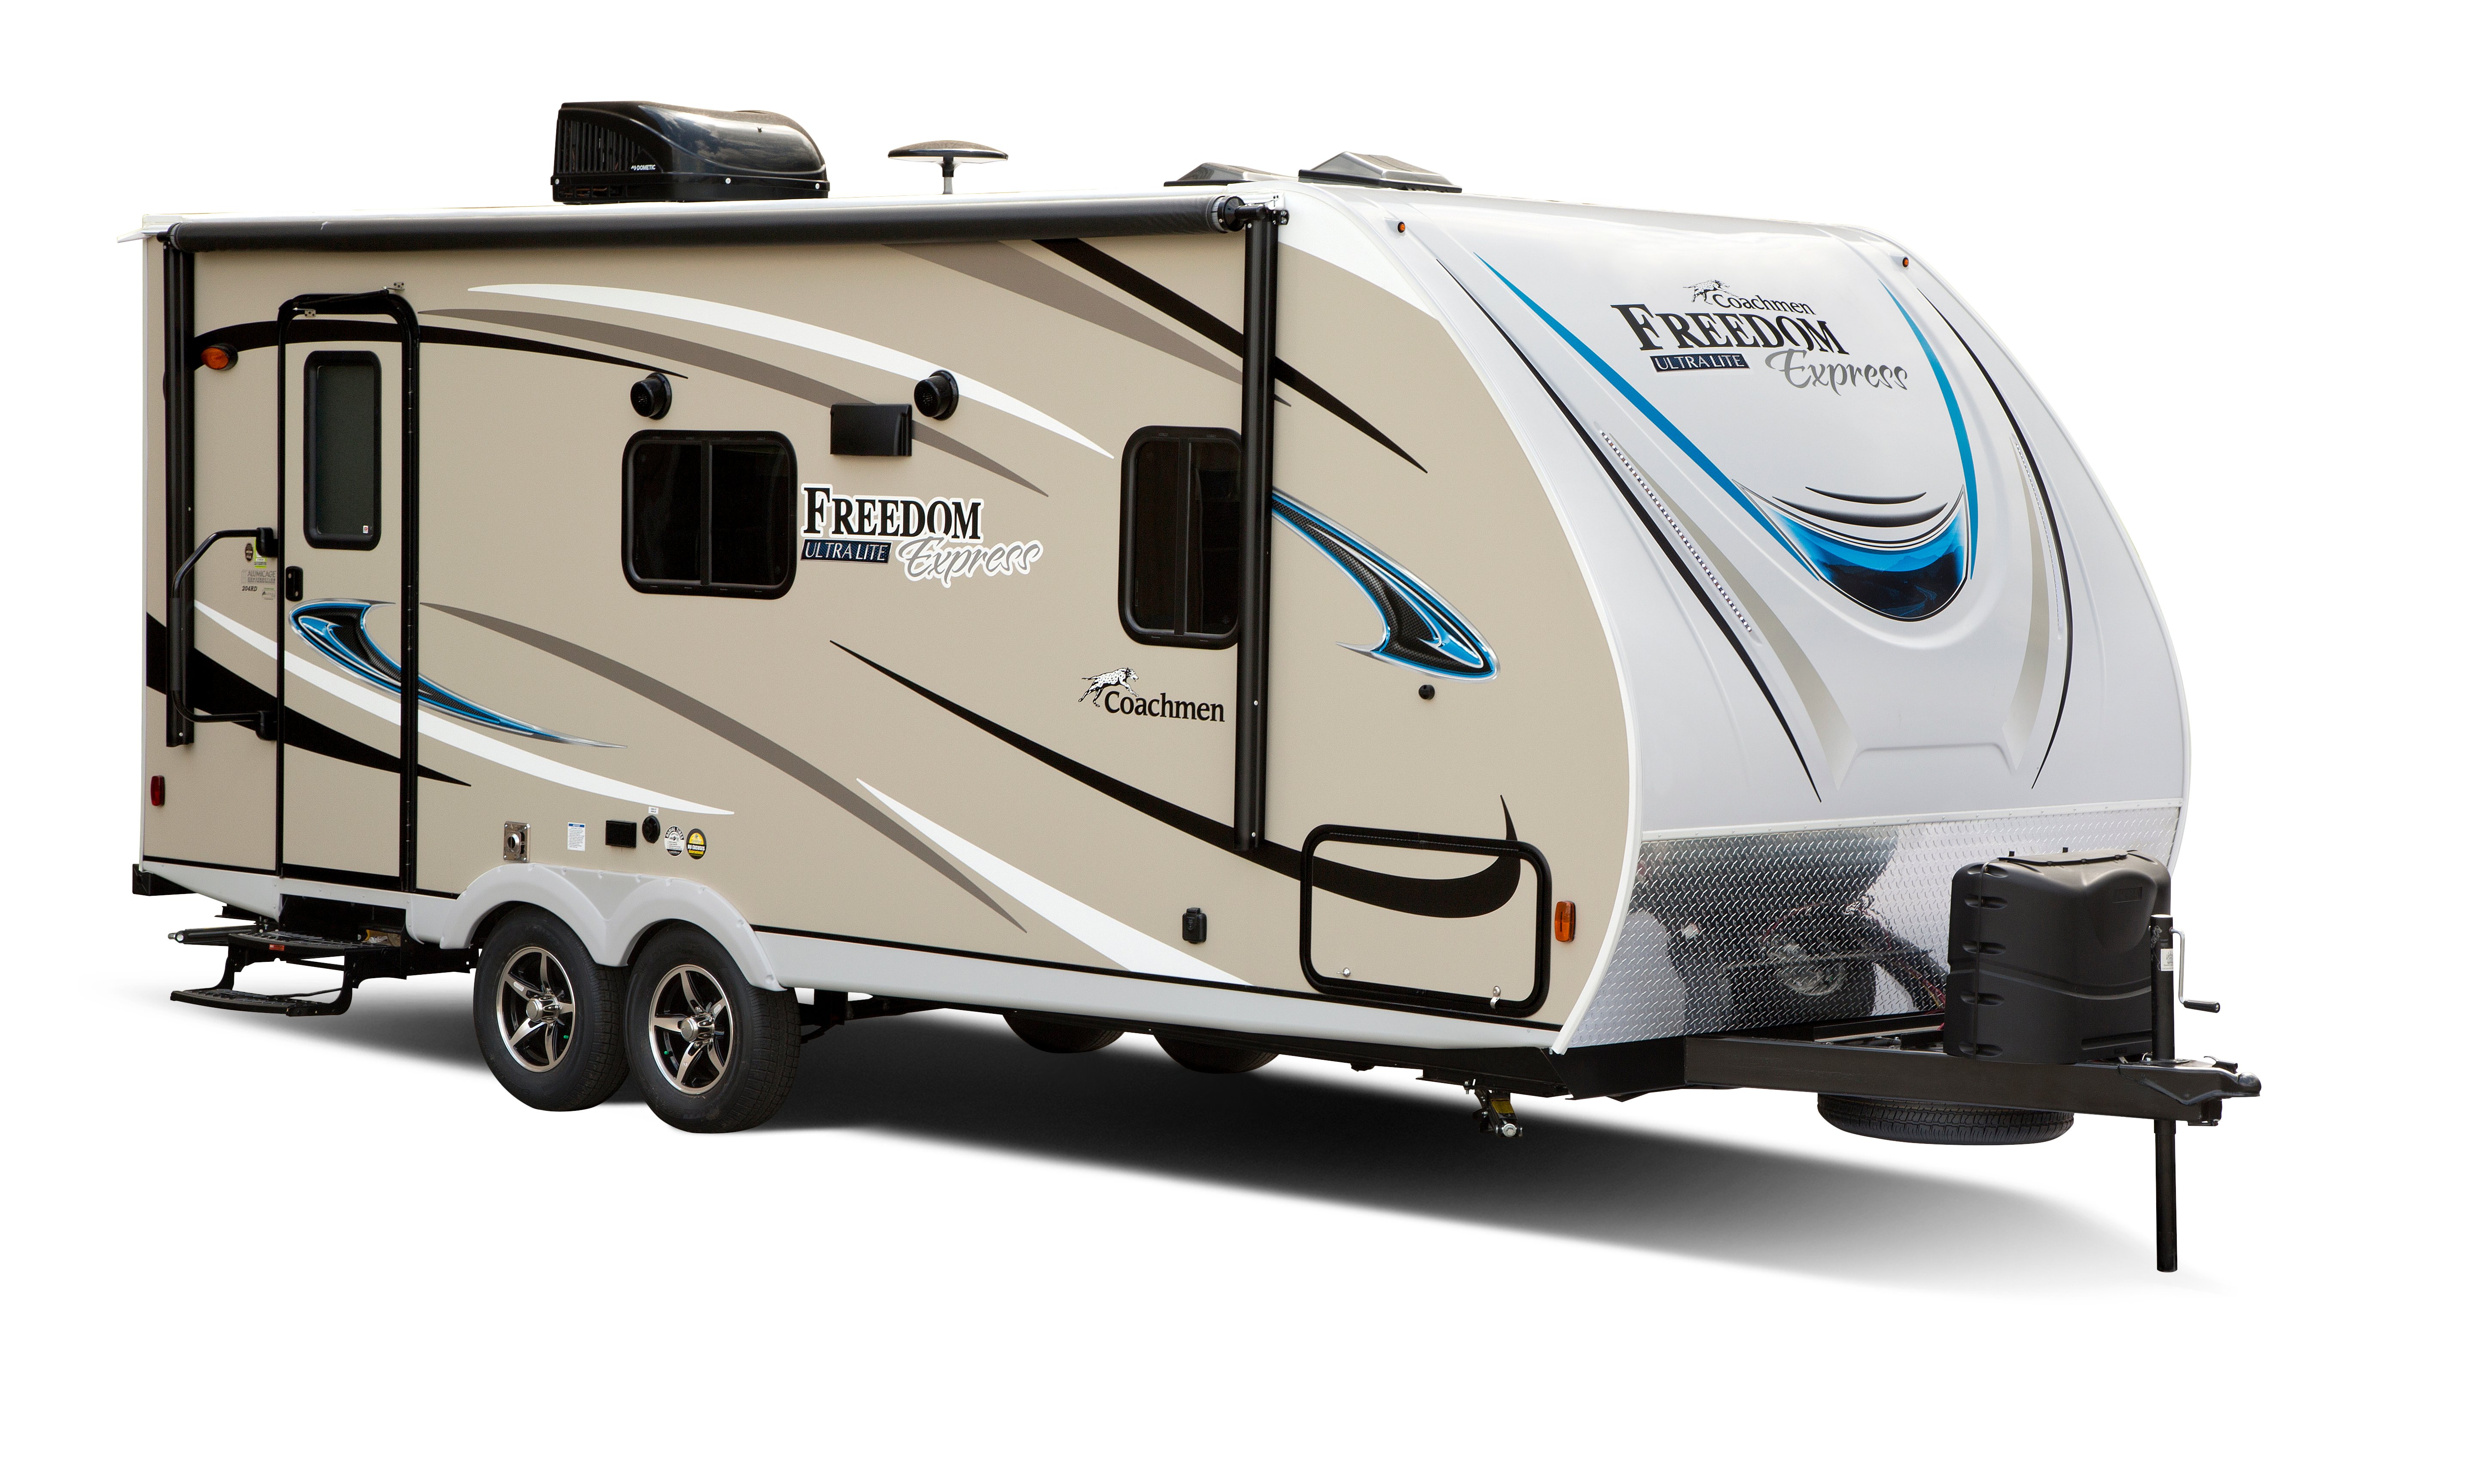 Top 5 Travel Trailers With Rear Kitchens